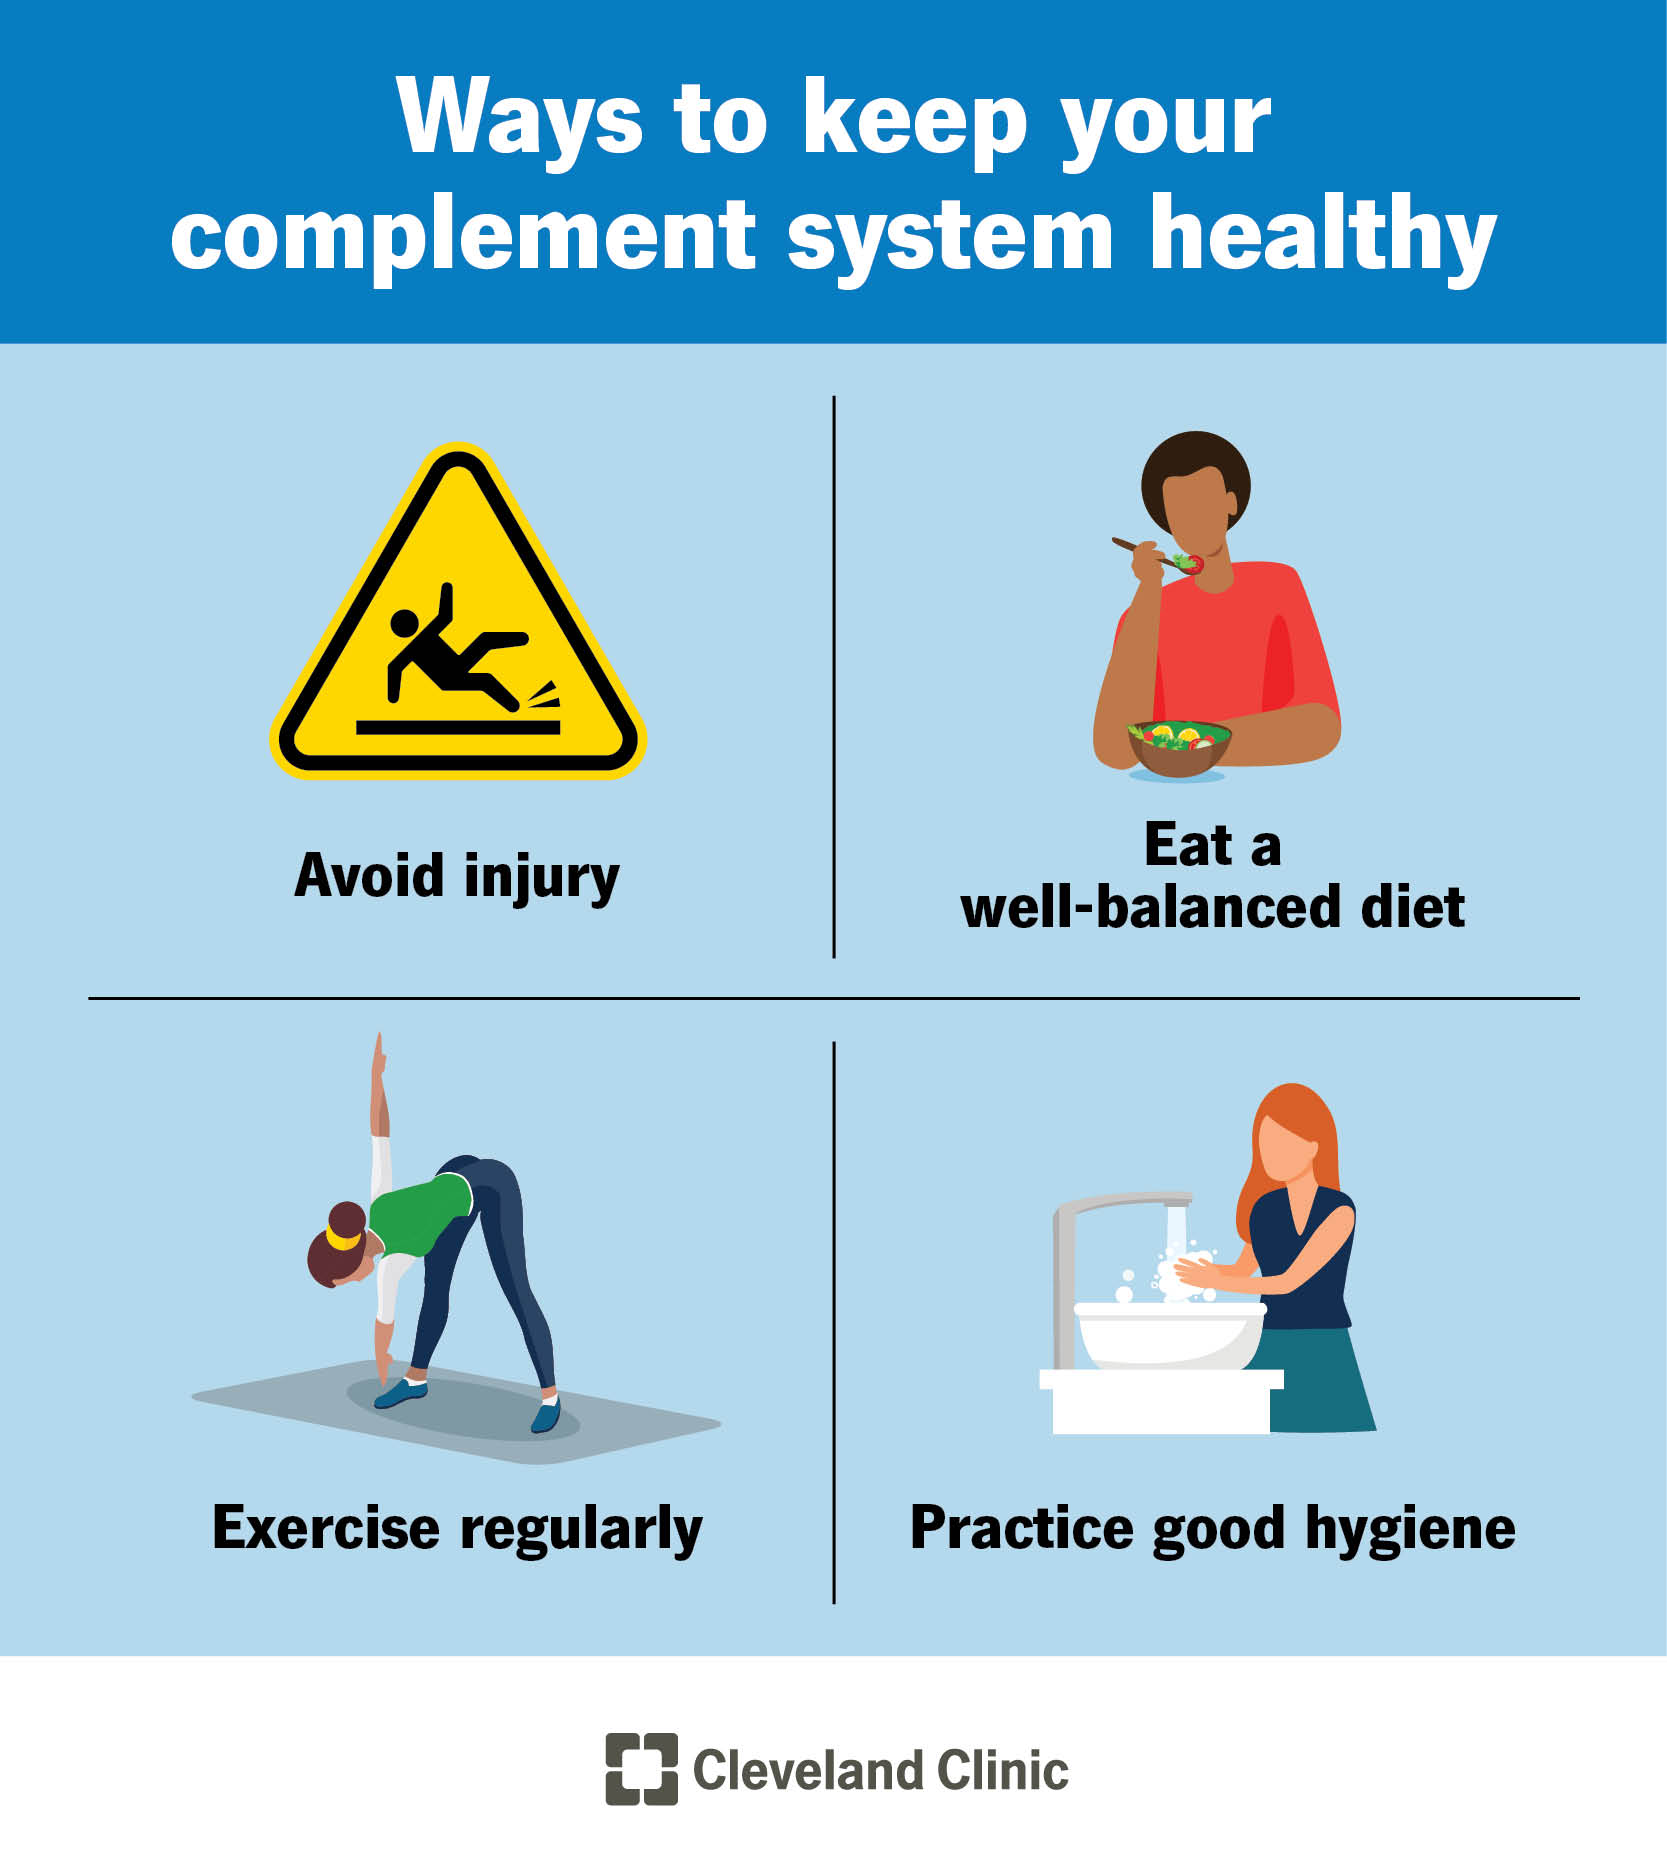 Your complement system is part of your immune system. There are several ways you can keep your complement system healthy.